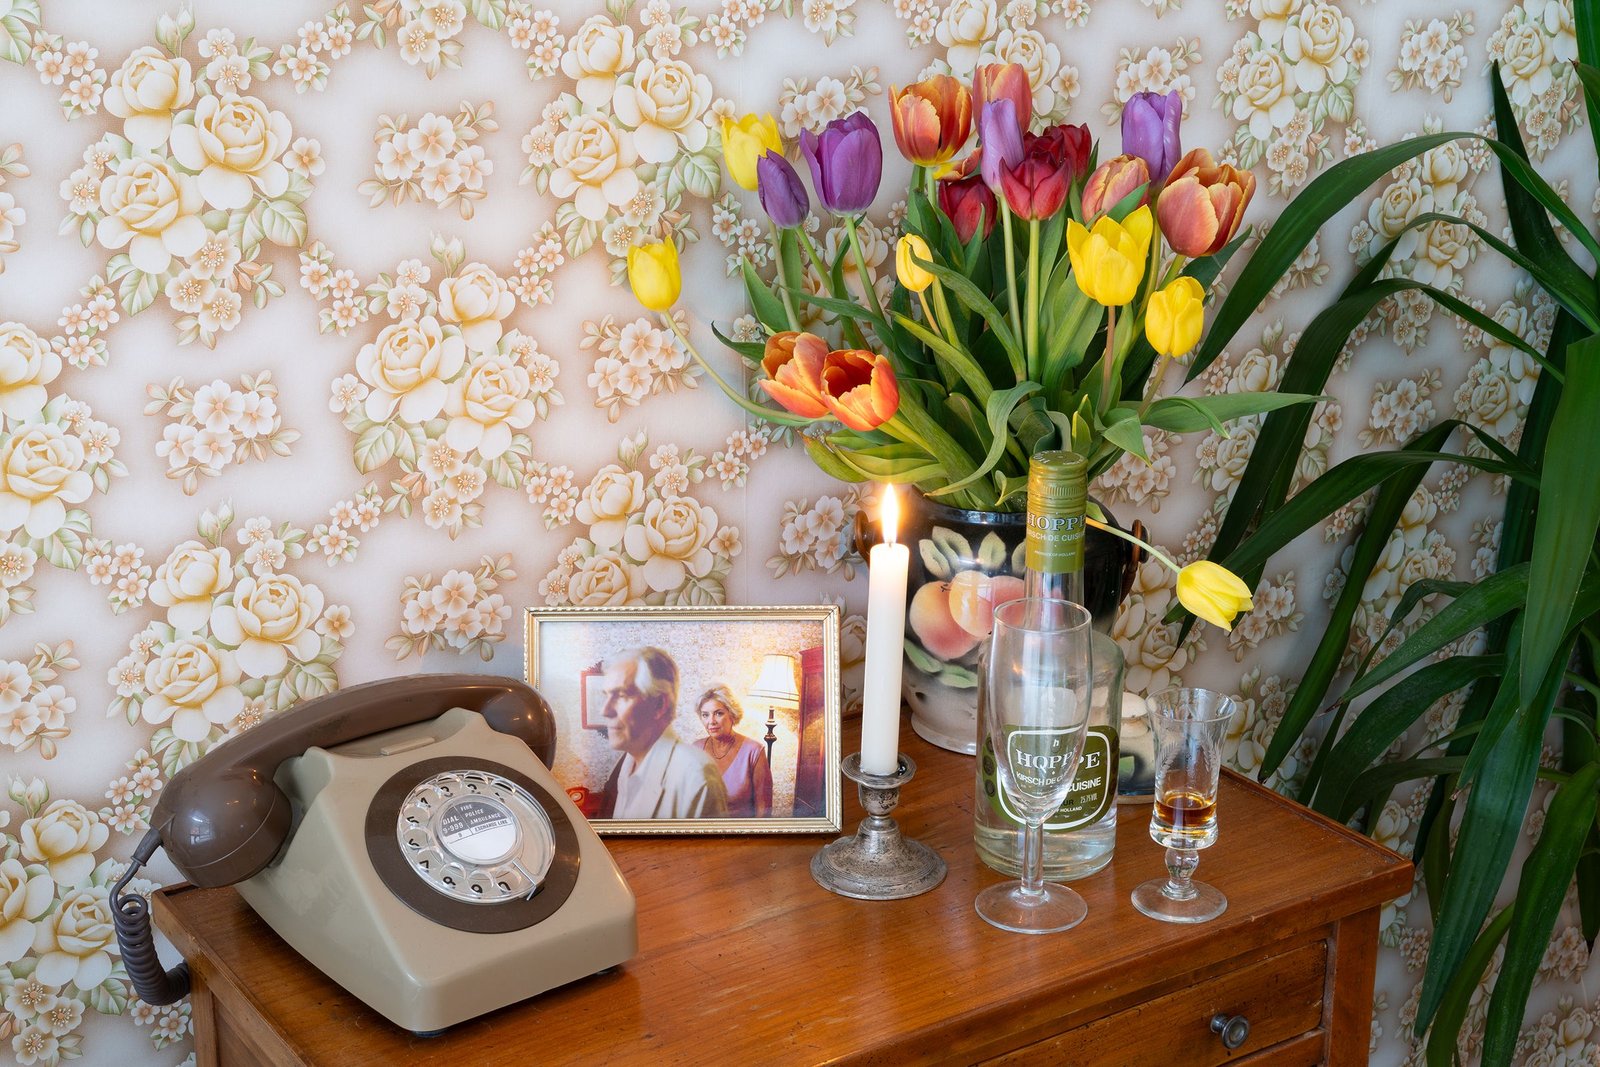 drawers with a rotary phone, picture in frame, lit candle and flowers